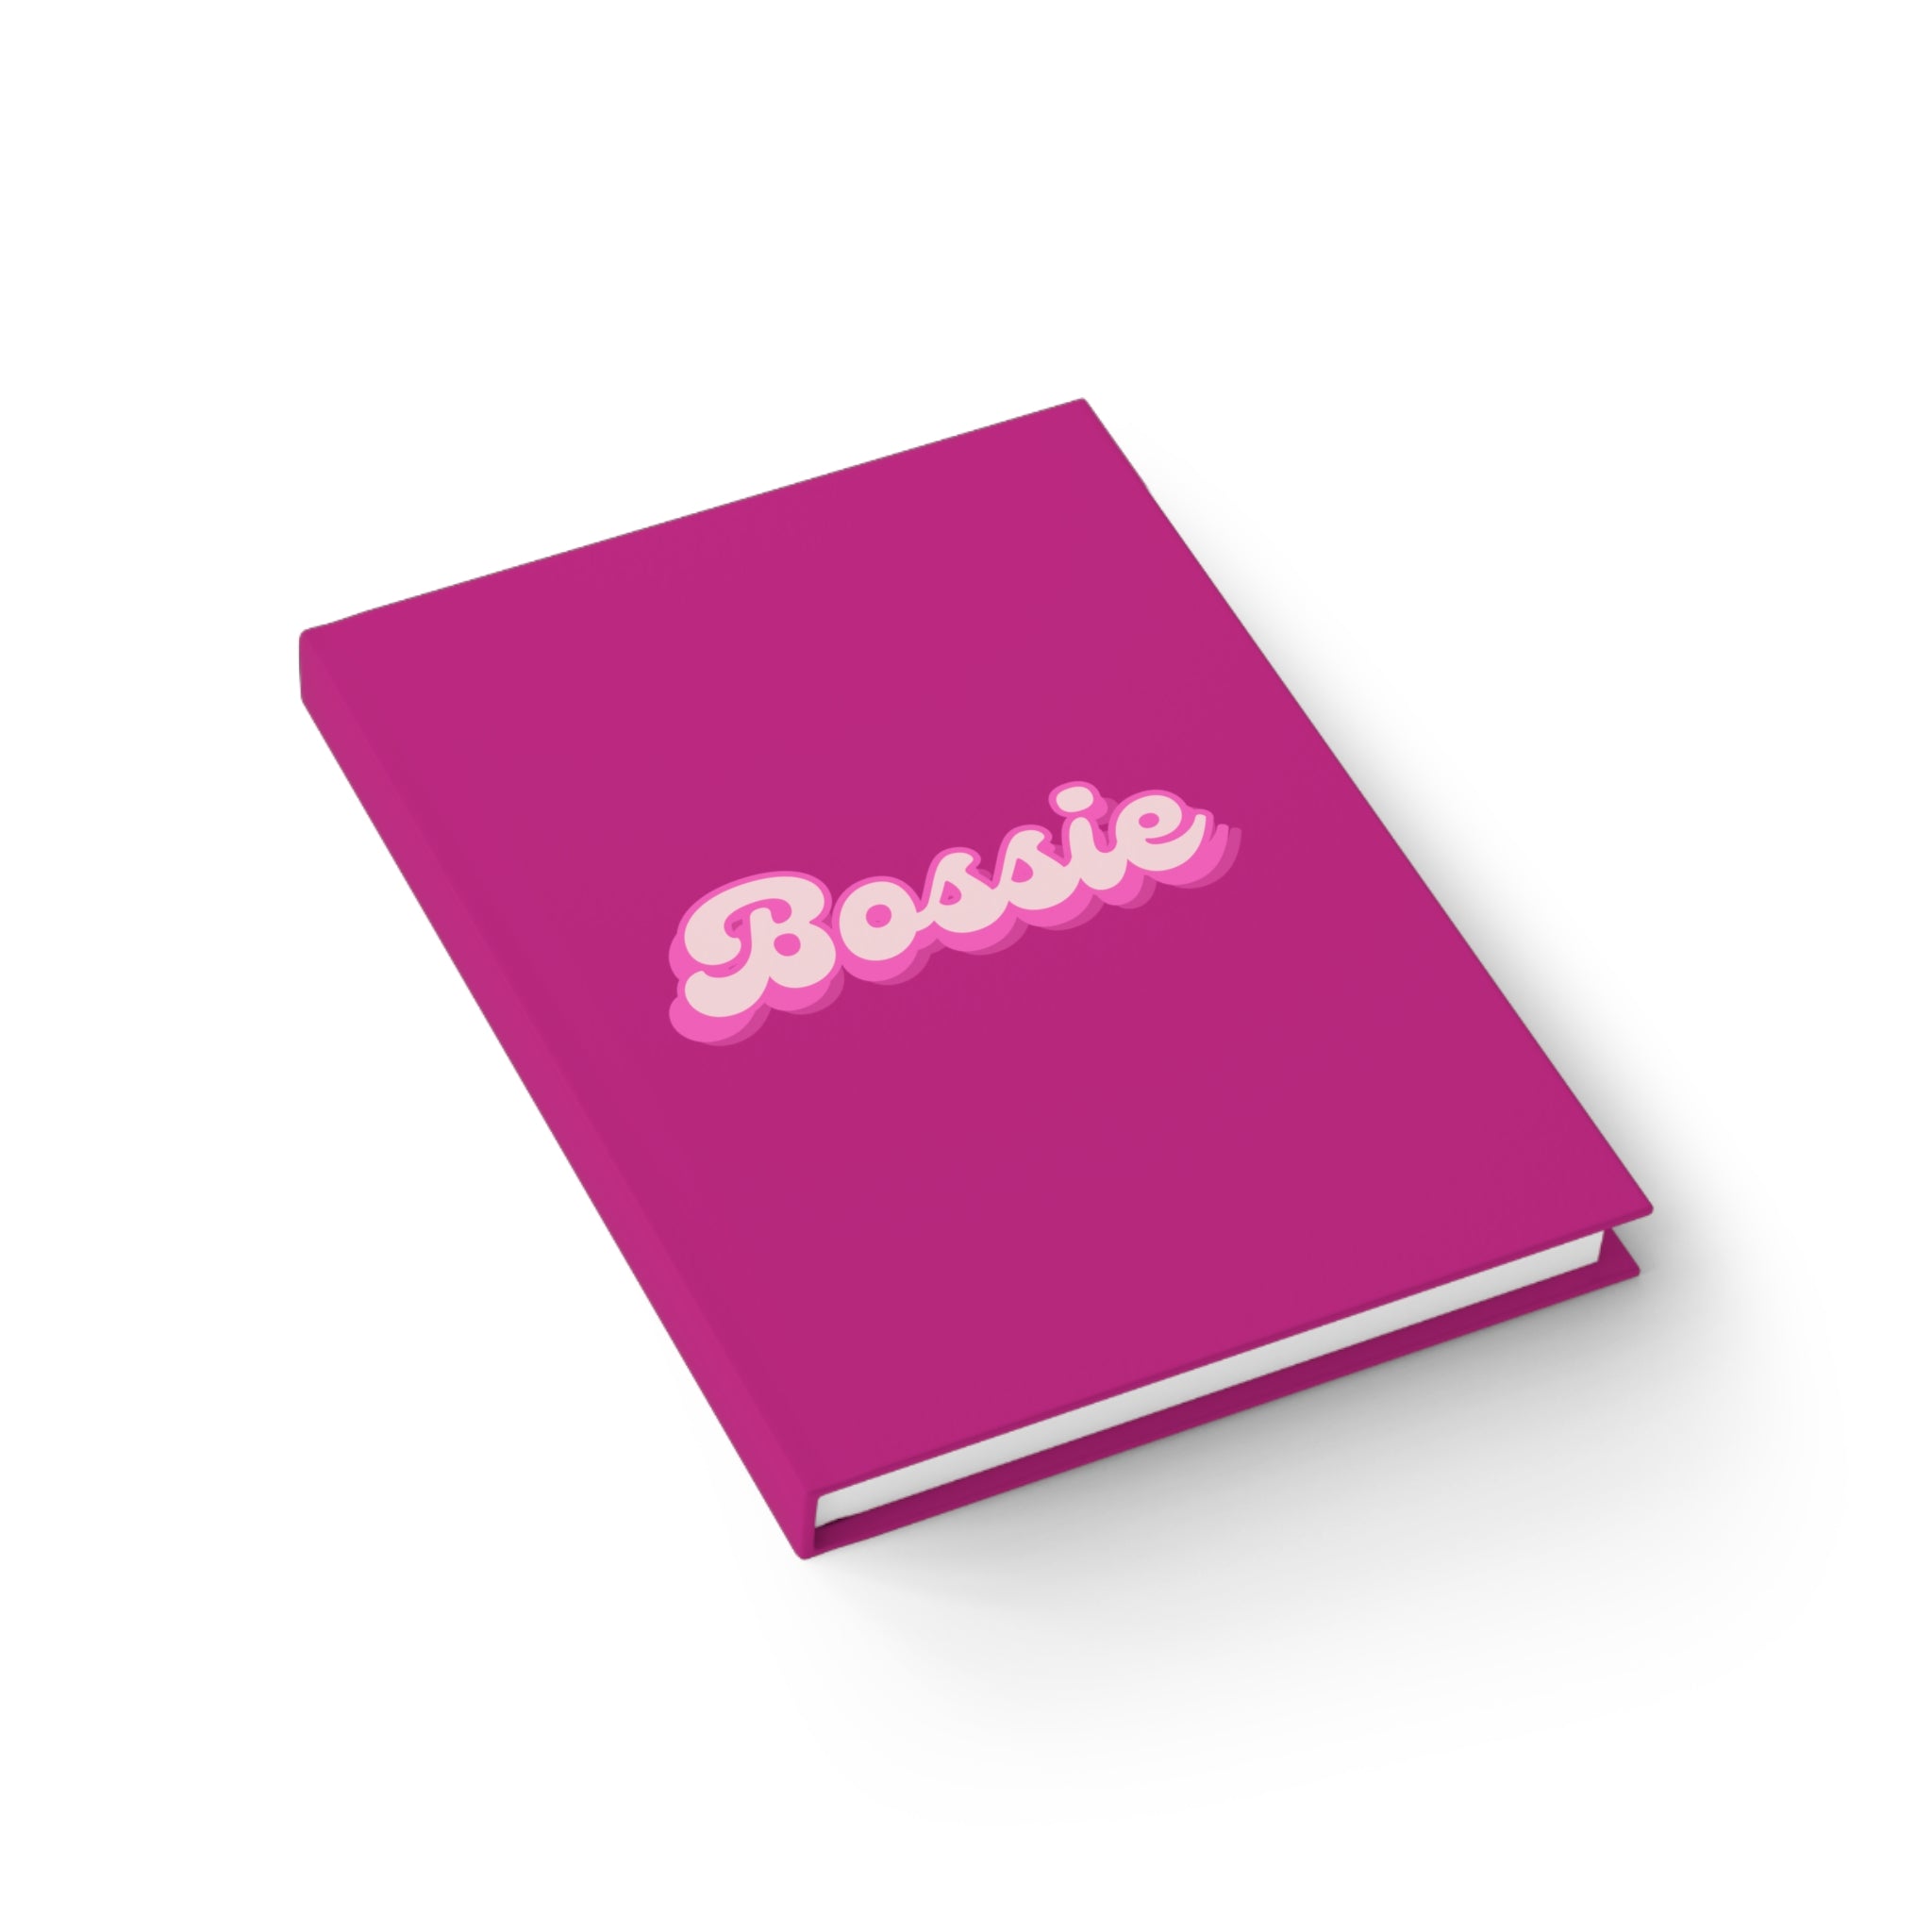 Bright Pink "Bossie" Journal - Ruled Line, Lined Notebook, Gratitude Journal